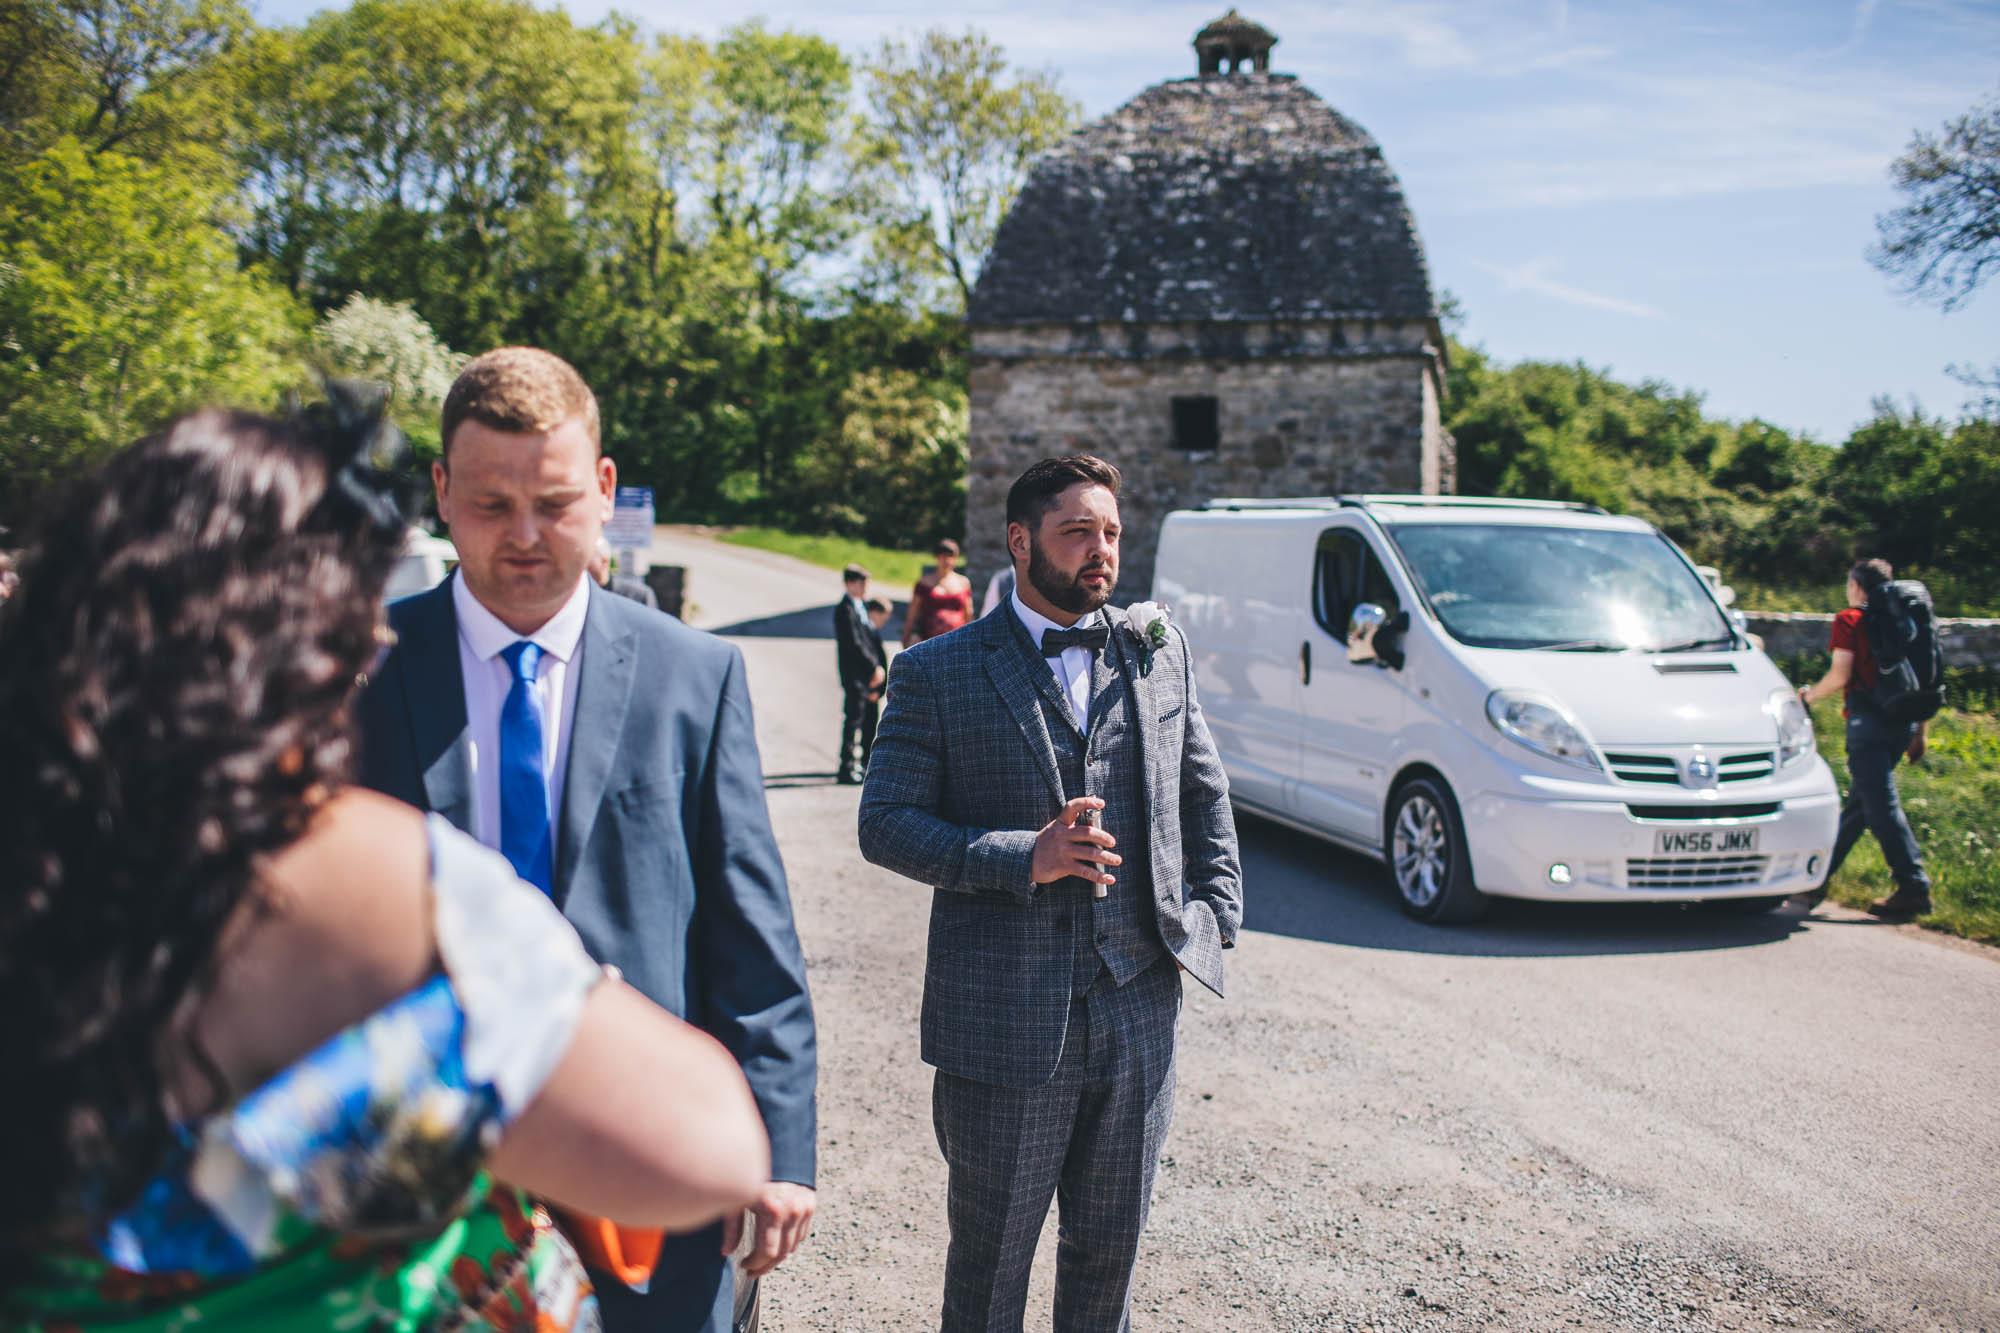 Groom stands in road amongst wedding guests in anticipation of his bride arriving at the Church